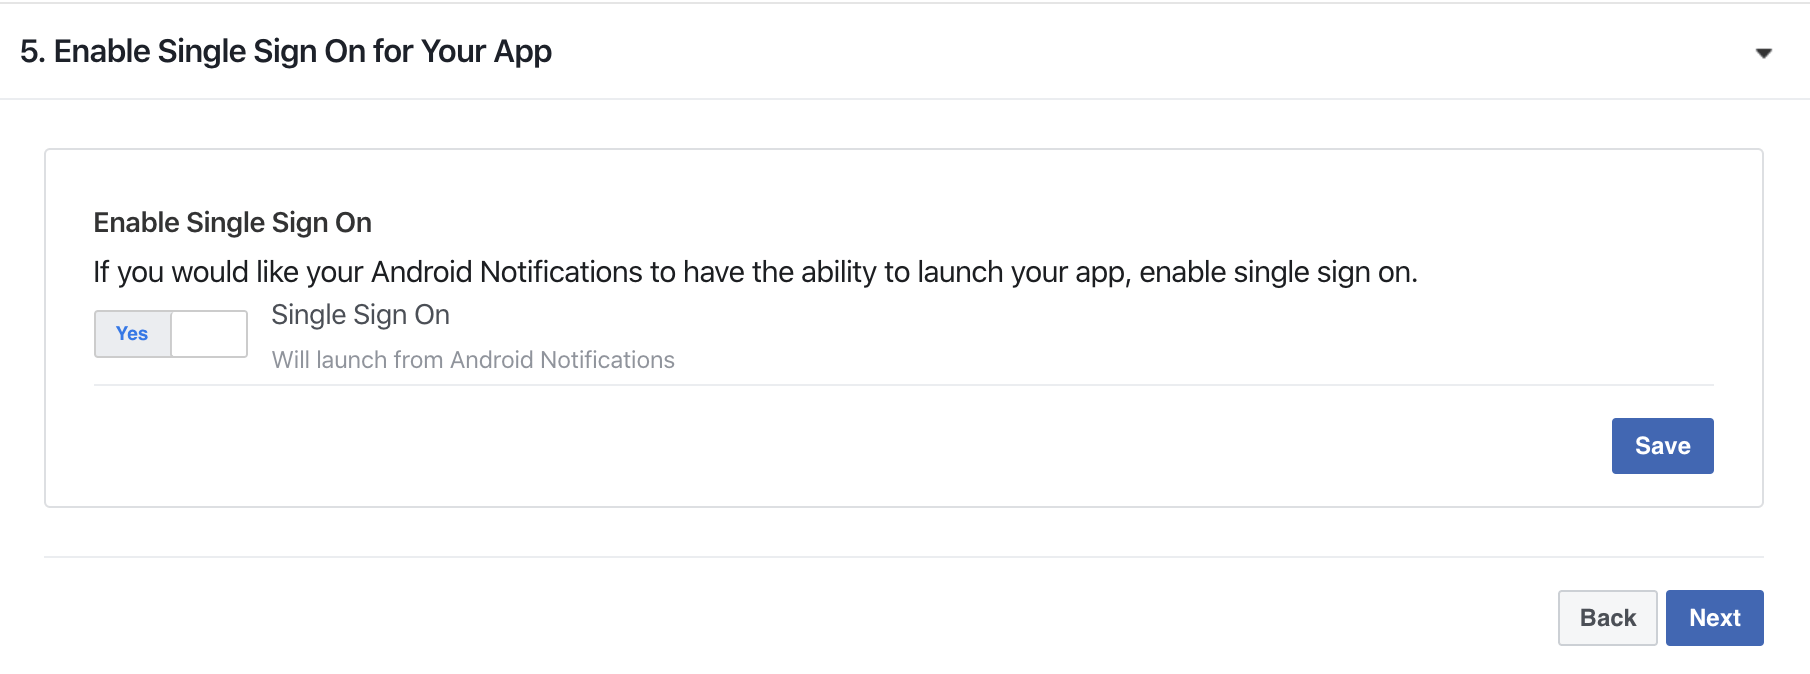 Enable single sign on for your app